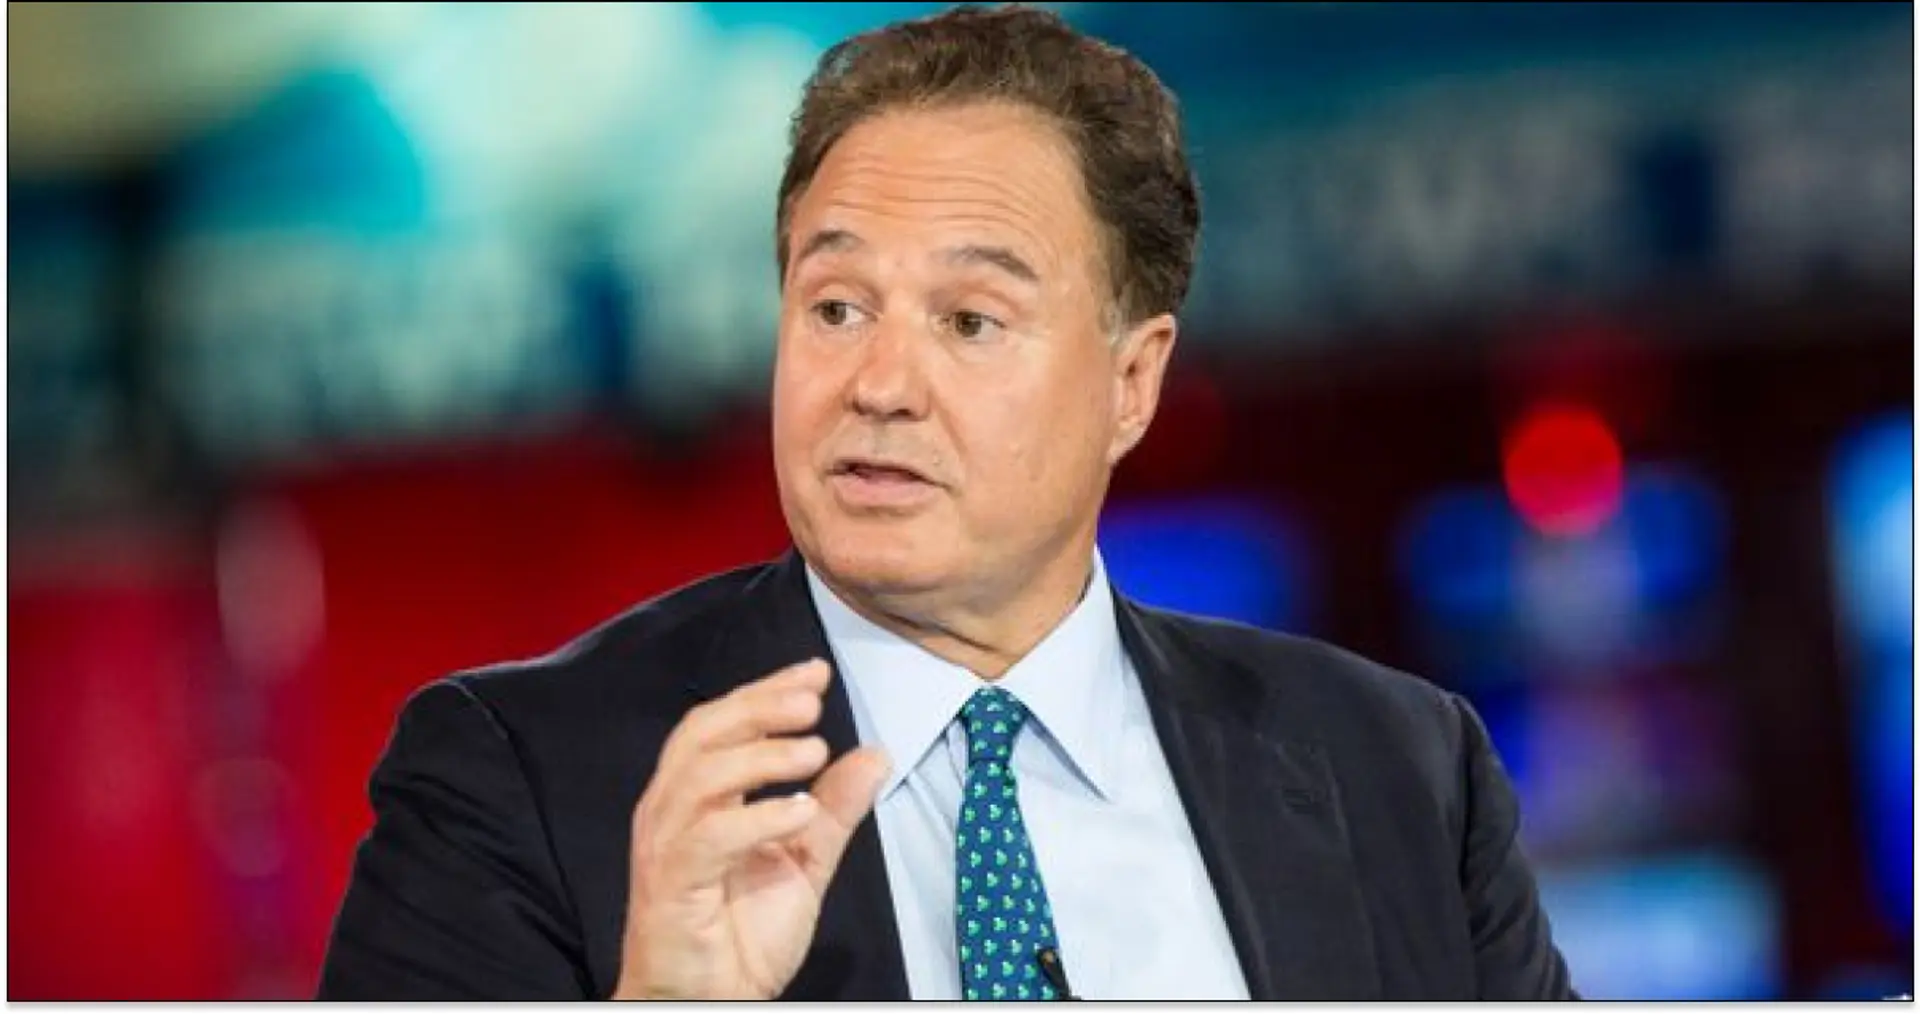 US billionaire Pagliuca 'serious contender' to buy Liverpool: 5 things we know about him